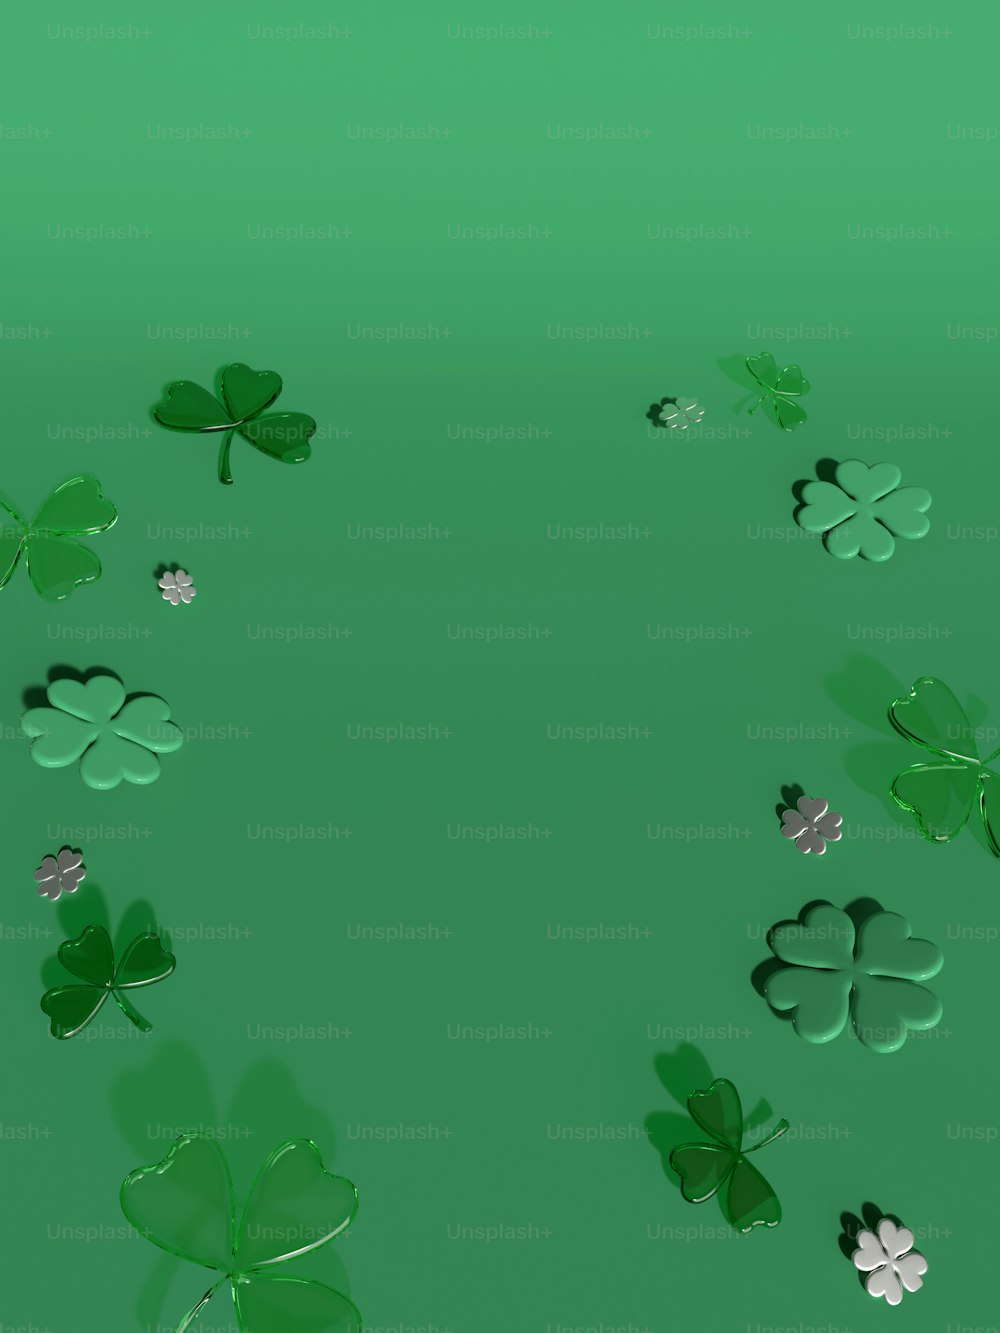 a group of green shamrocks on a green background